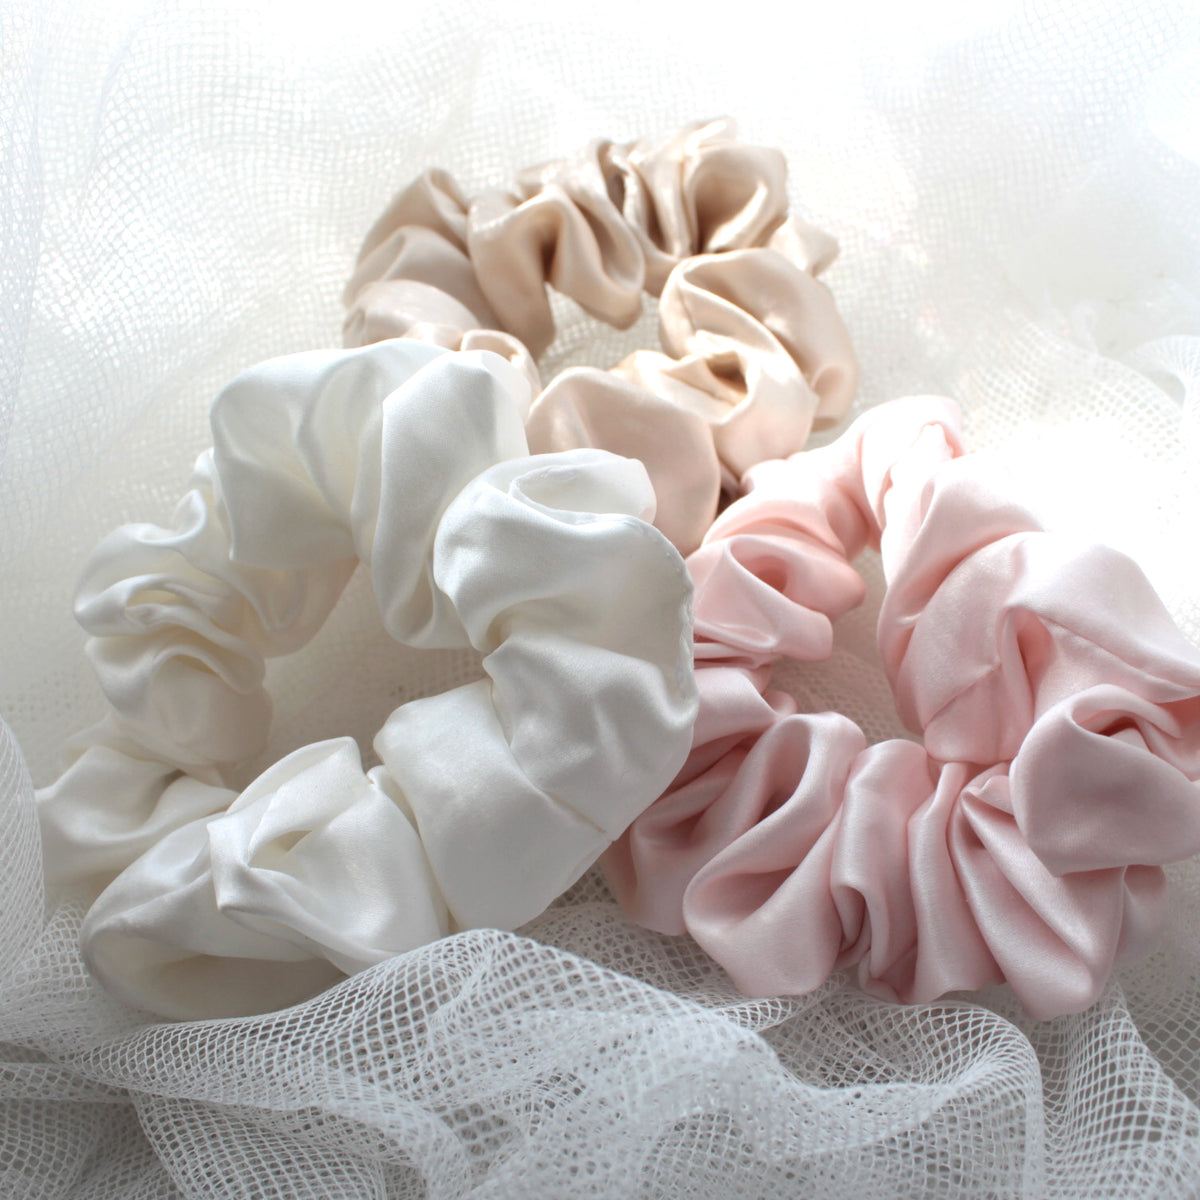 Mulberry Park Silks Scrunchies Ivory Pink Sand Bridesmaid Gift